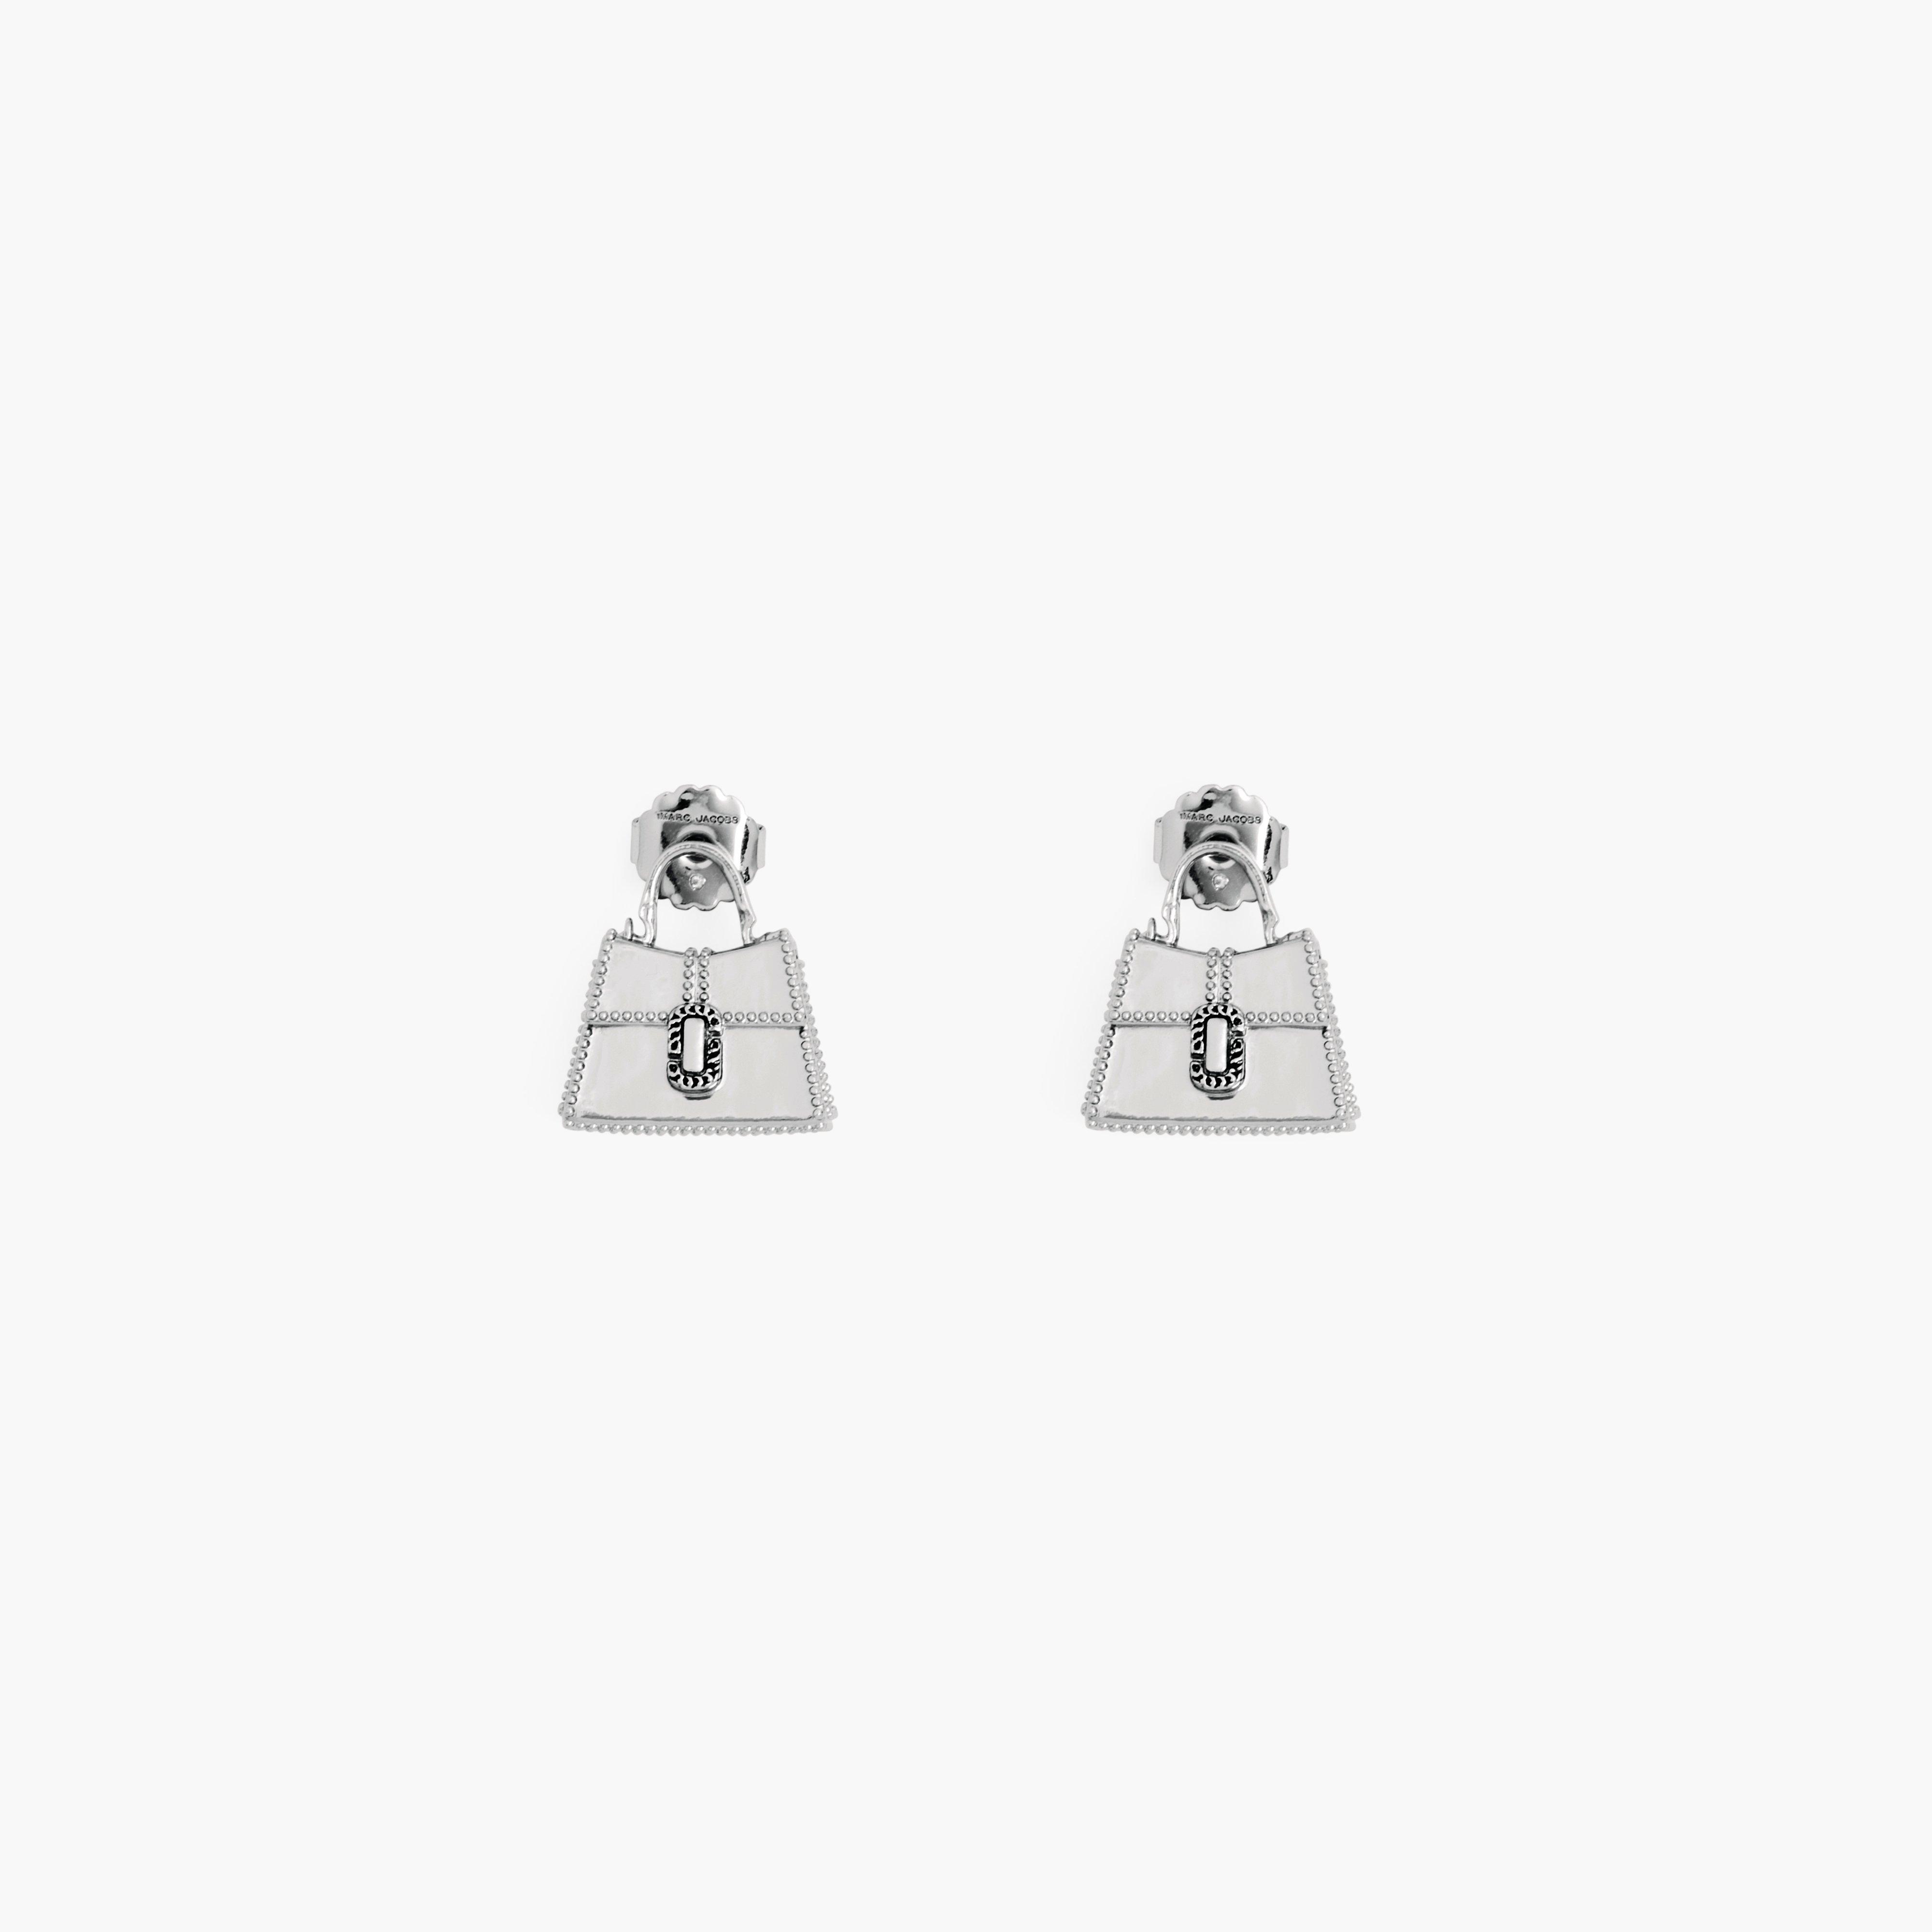 Marc by Marc jacobs The St. Marc Earrings,LIGHT ANTIQUE SILVER